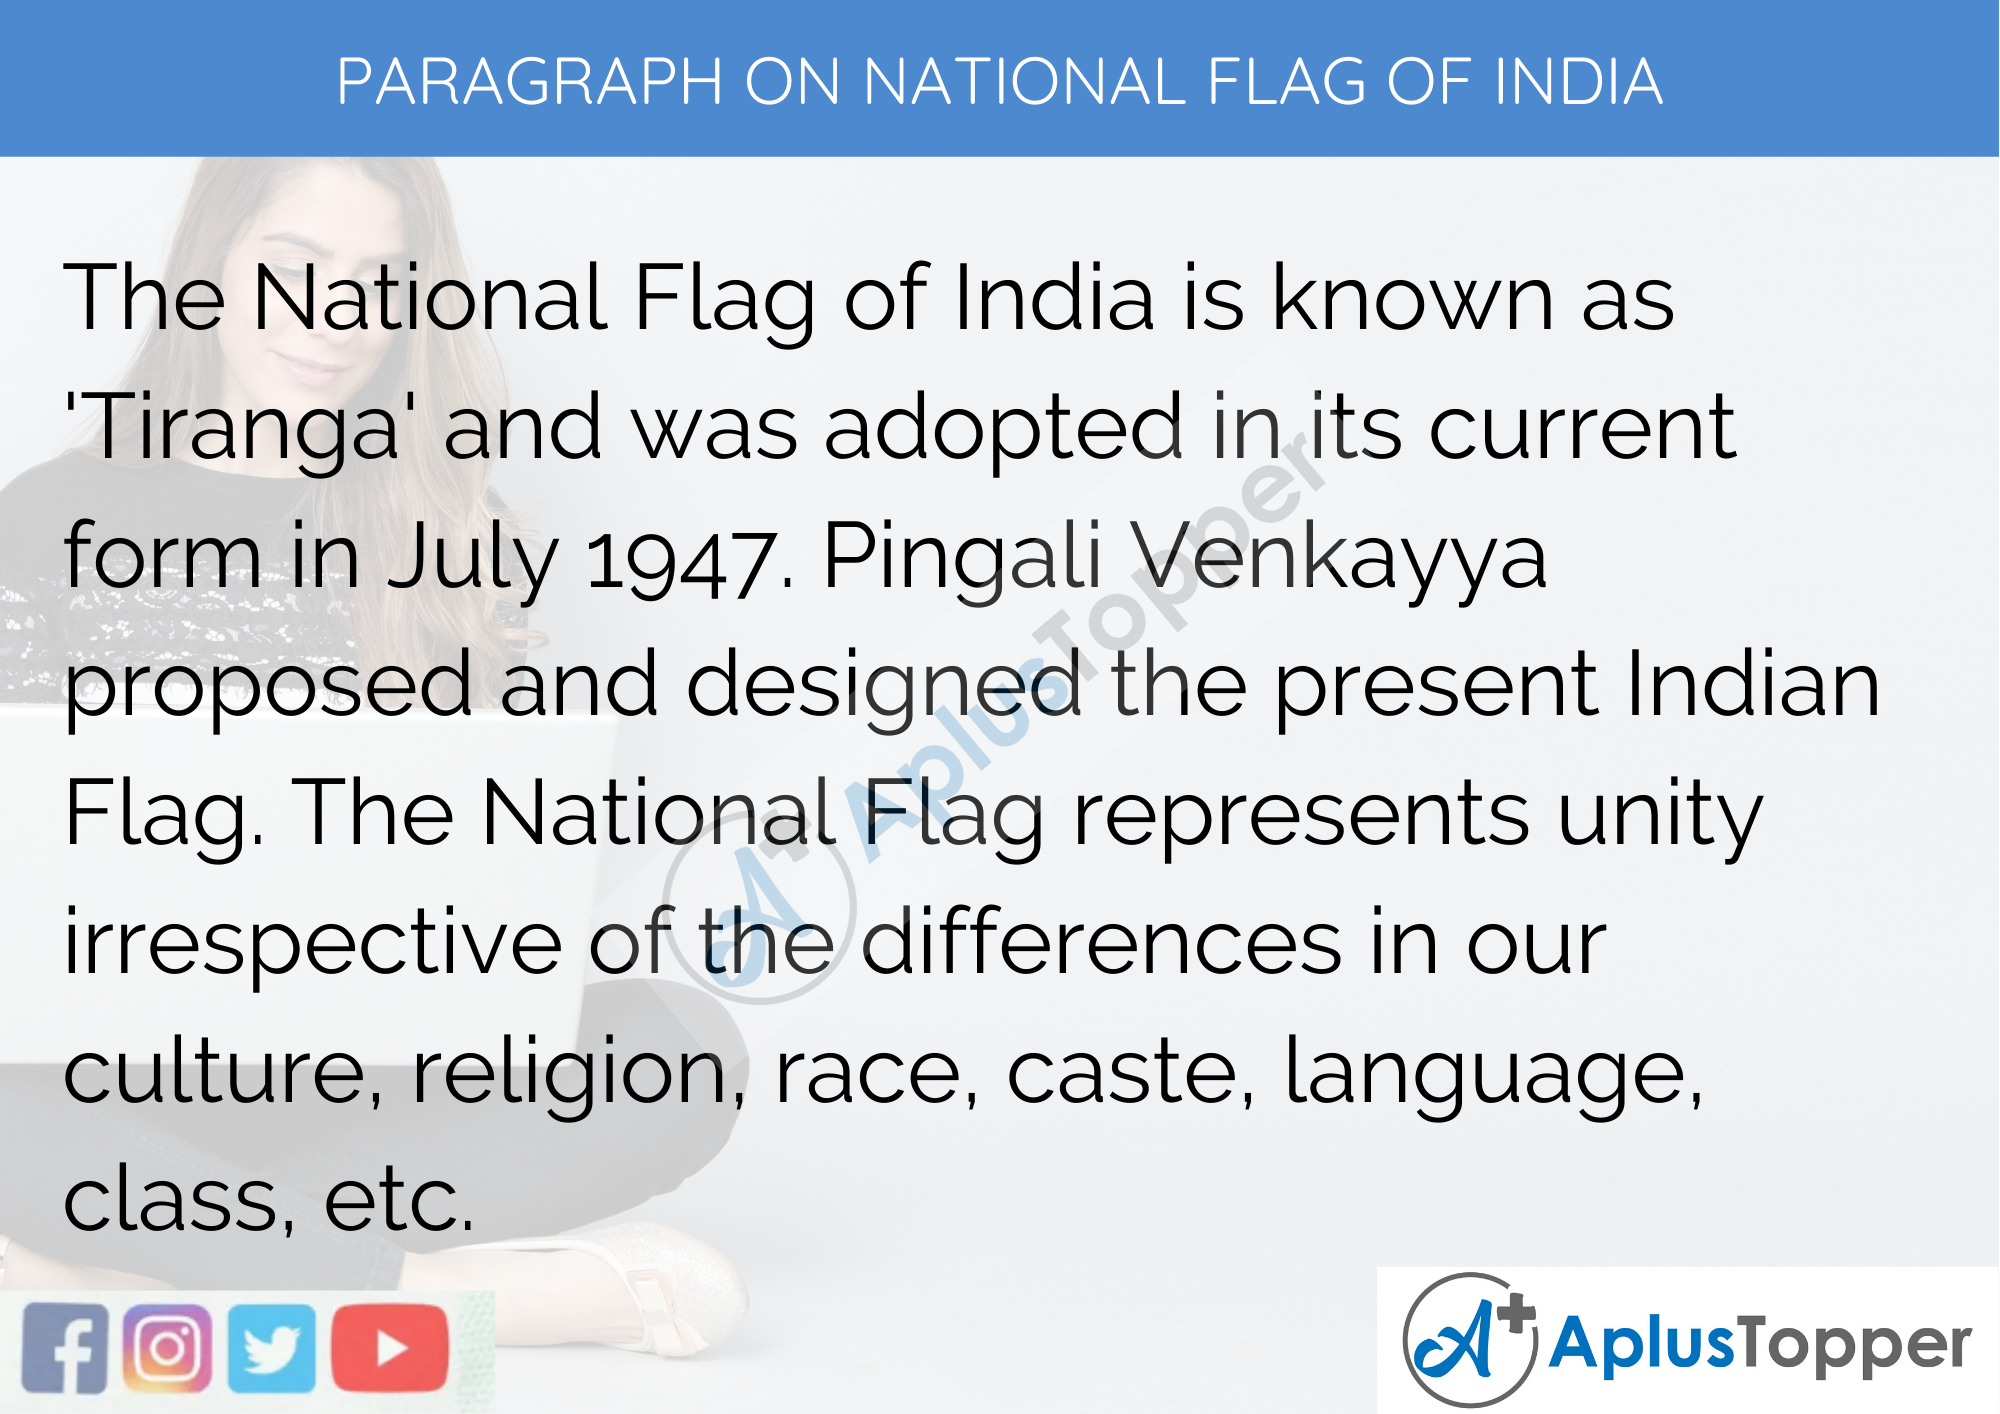 Paragraph on National Flag of India - 100 Words for Classes 1, 2, and 3 Kids